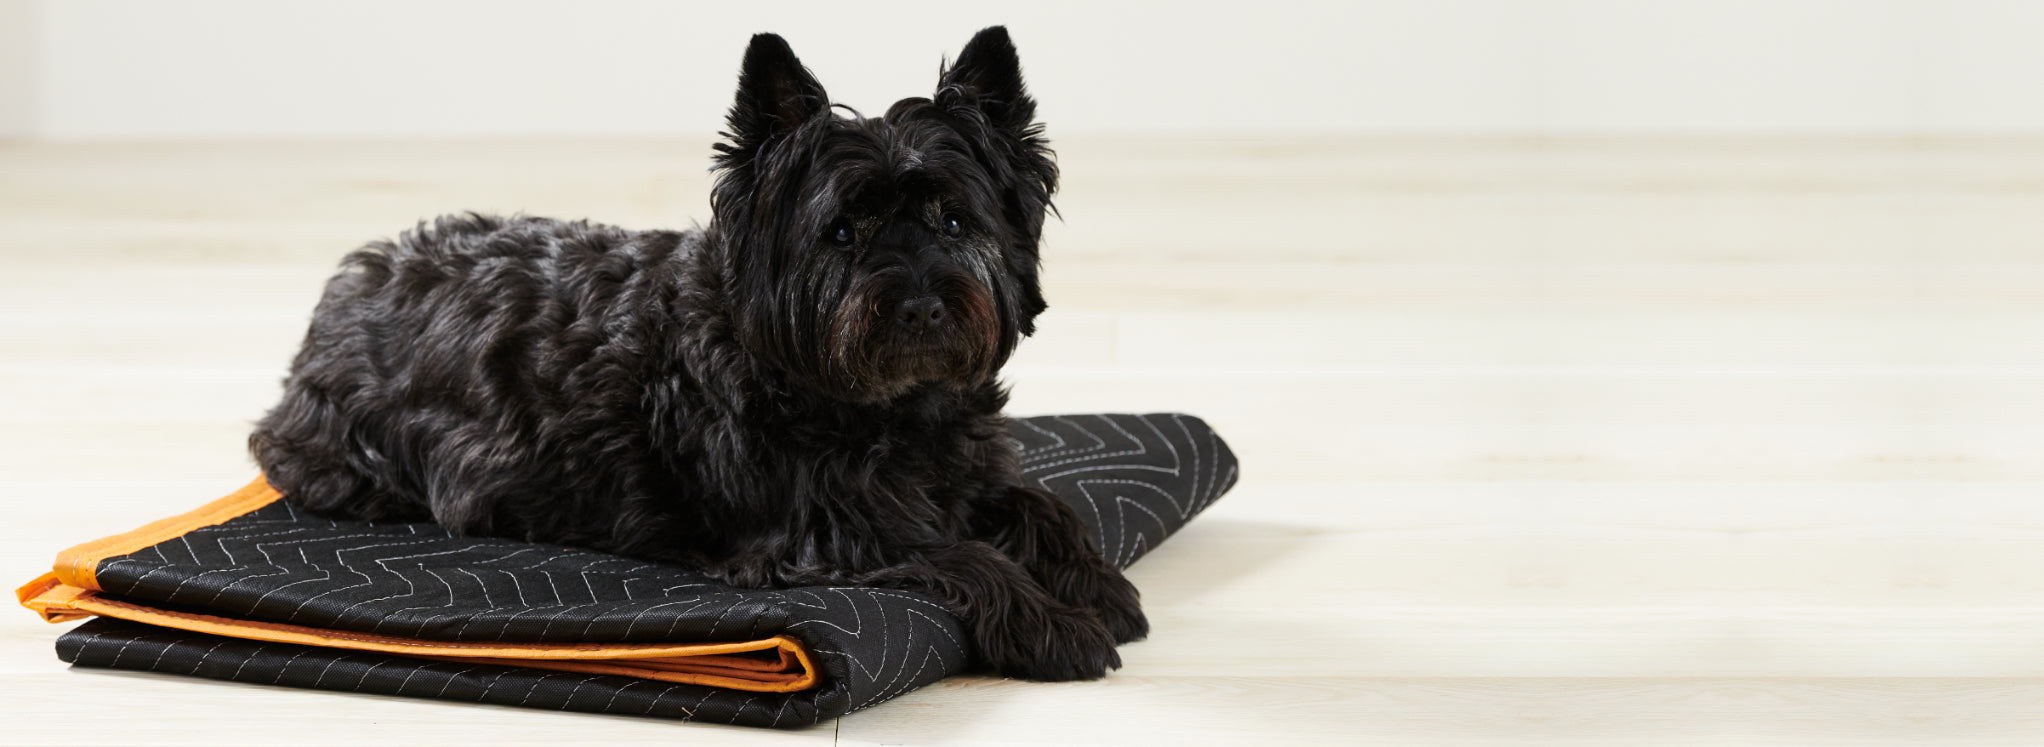 Rabbet's favorite mascot, a dog, chilling out on a packing blanket, similar to the blankets used by Rabbet to pack their tables.